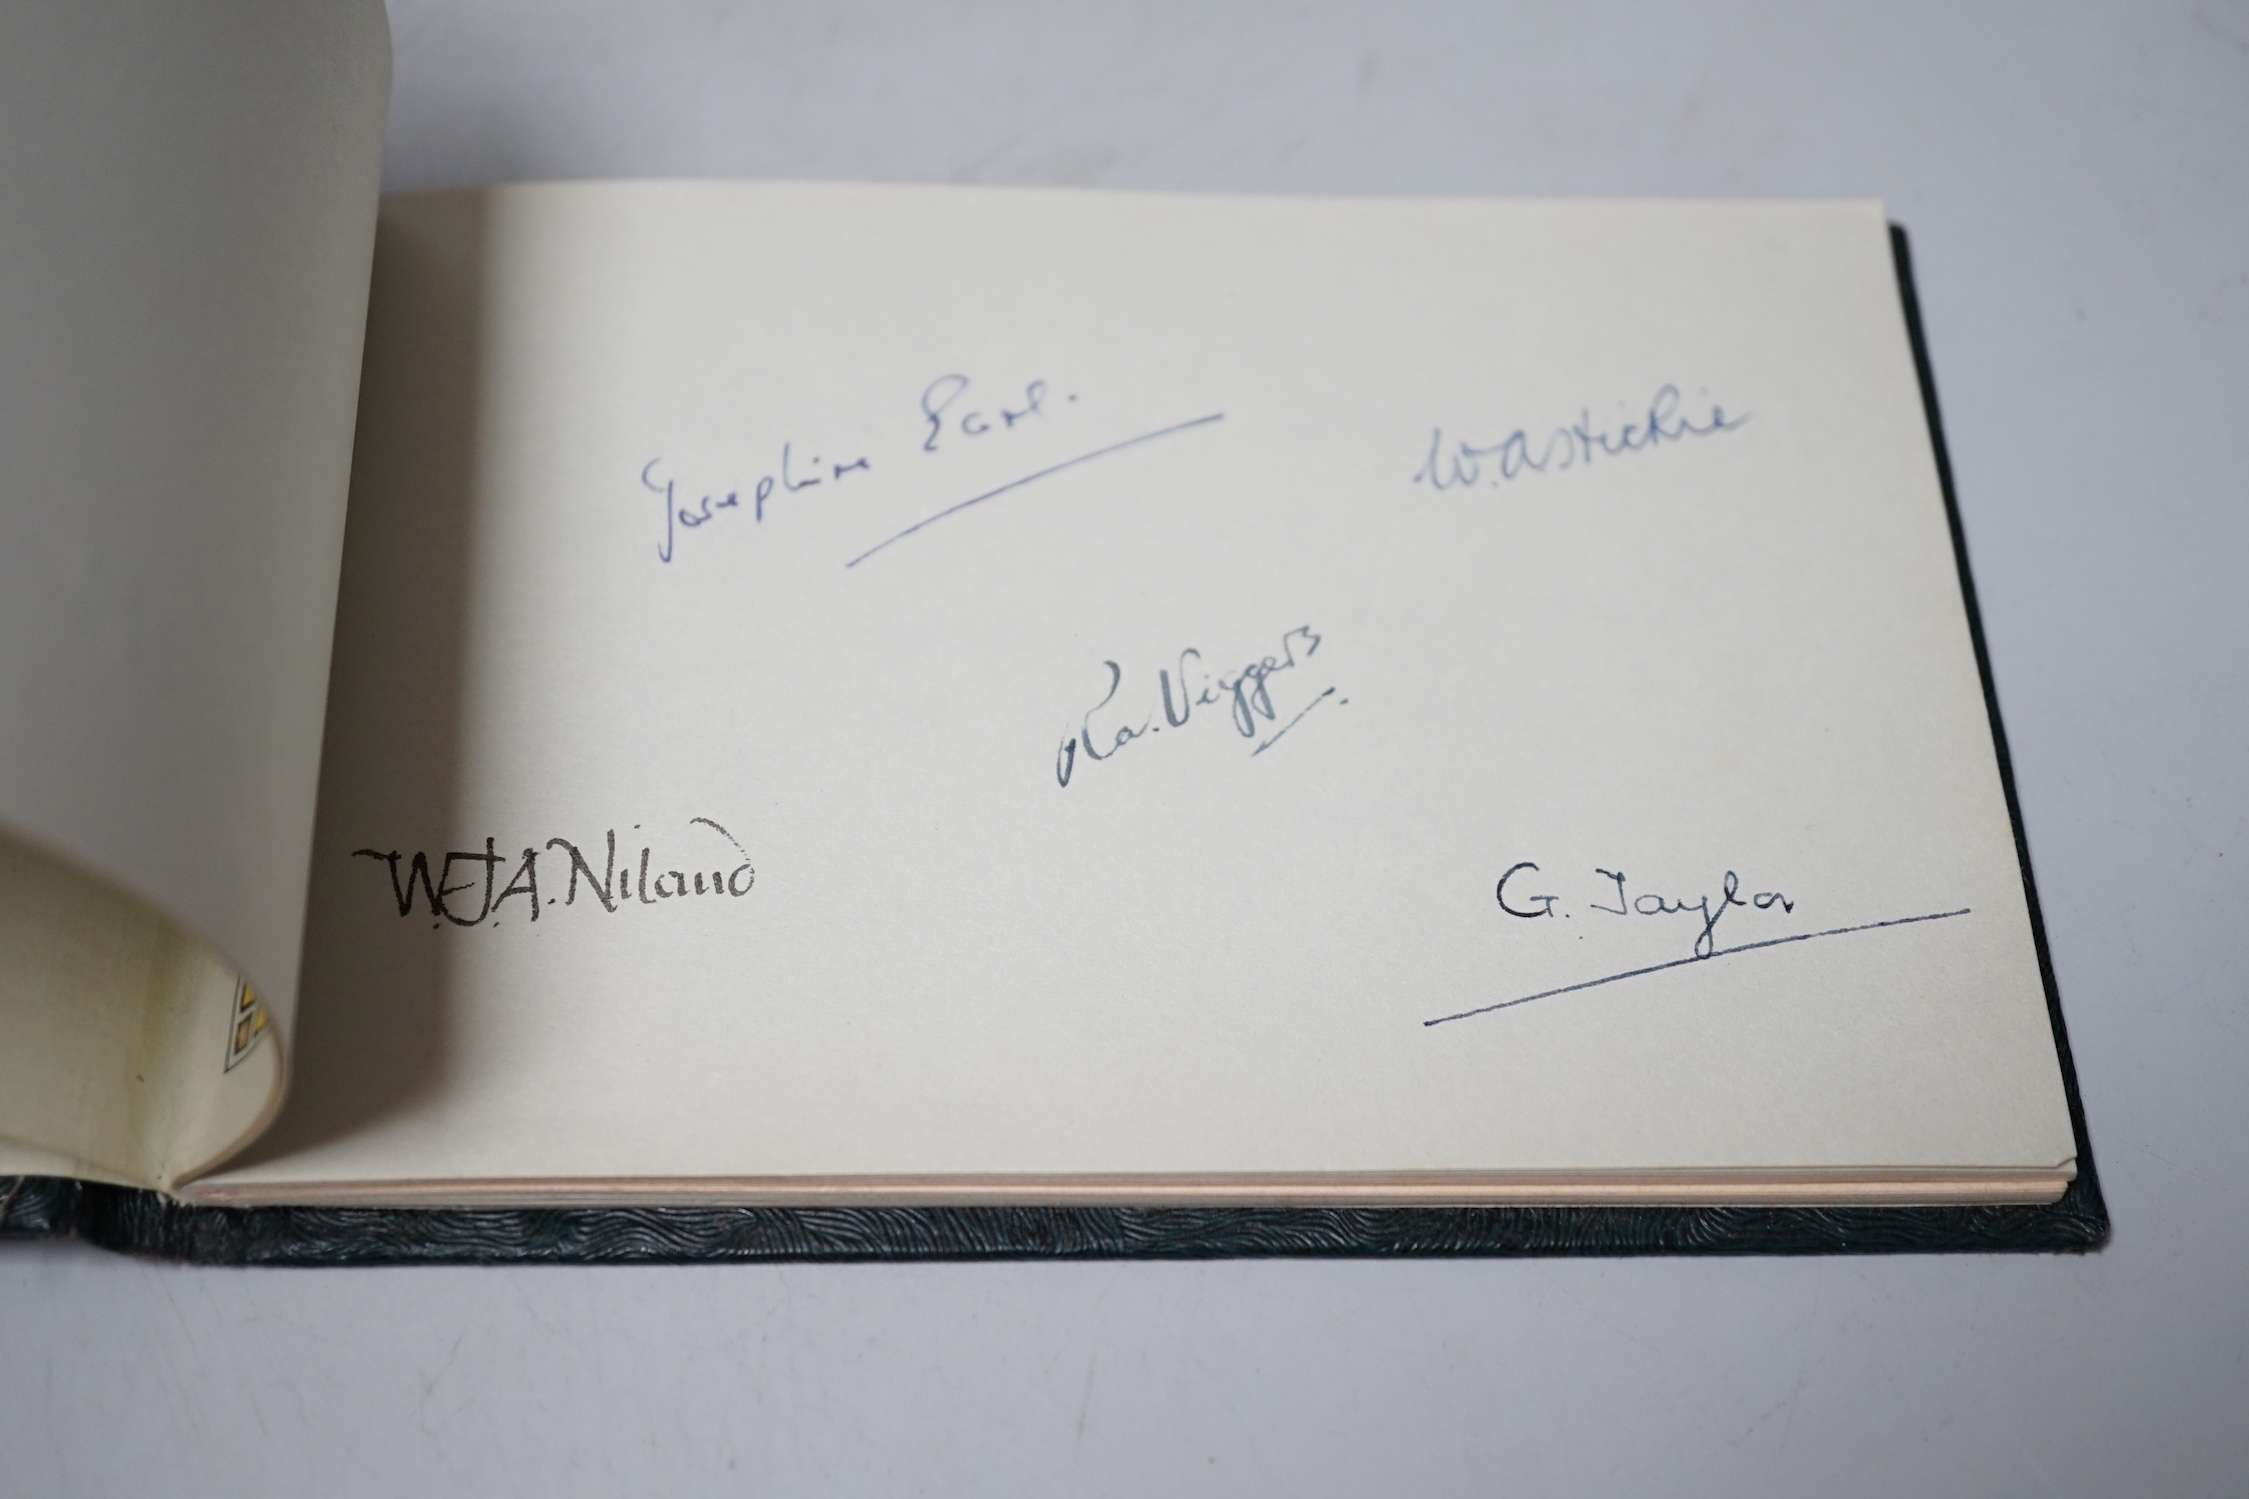 An Autograph book presented to EB Thomas esquire MBE, 4 January 1960 on the occasion of his retirement from public service with the Ministry of housing and local government, signed by his colleagues